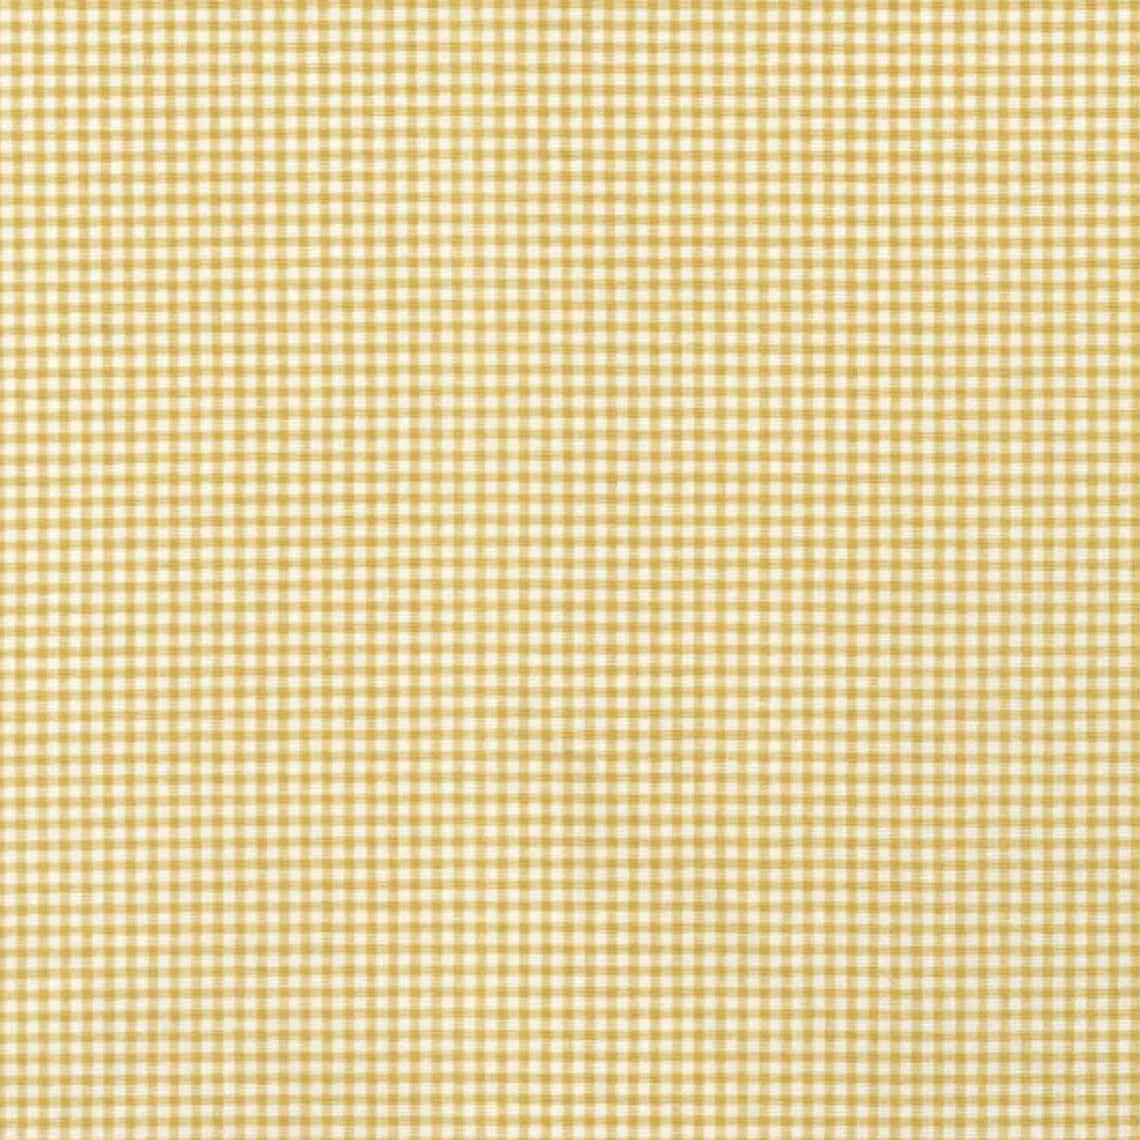 empress swag valance in farmhouse barley yellow gold gingham check